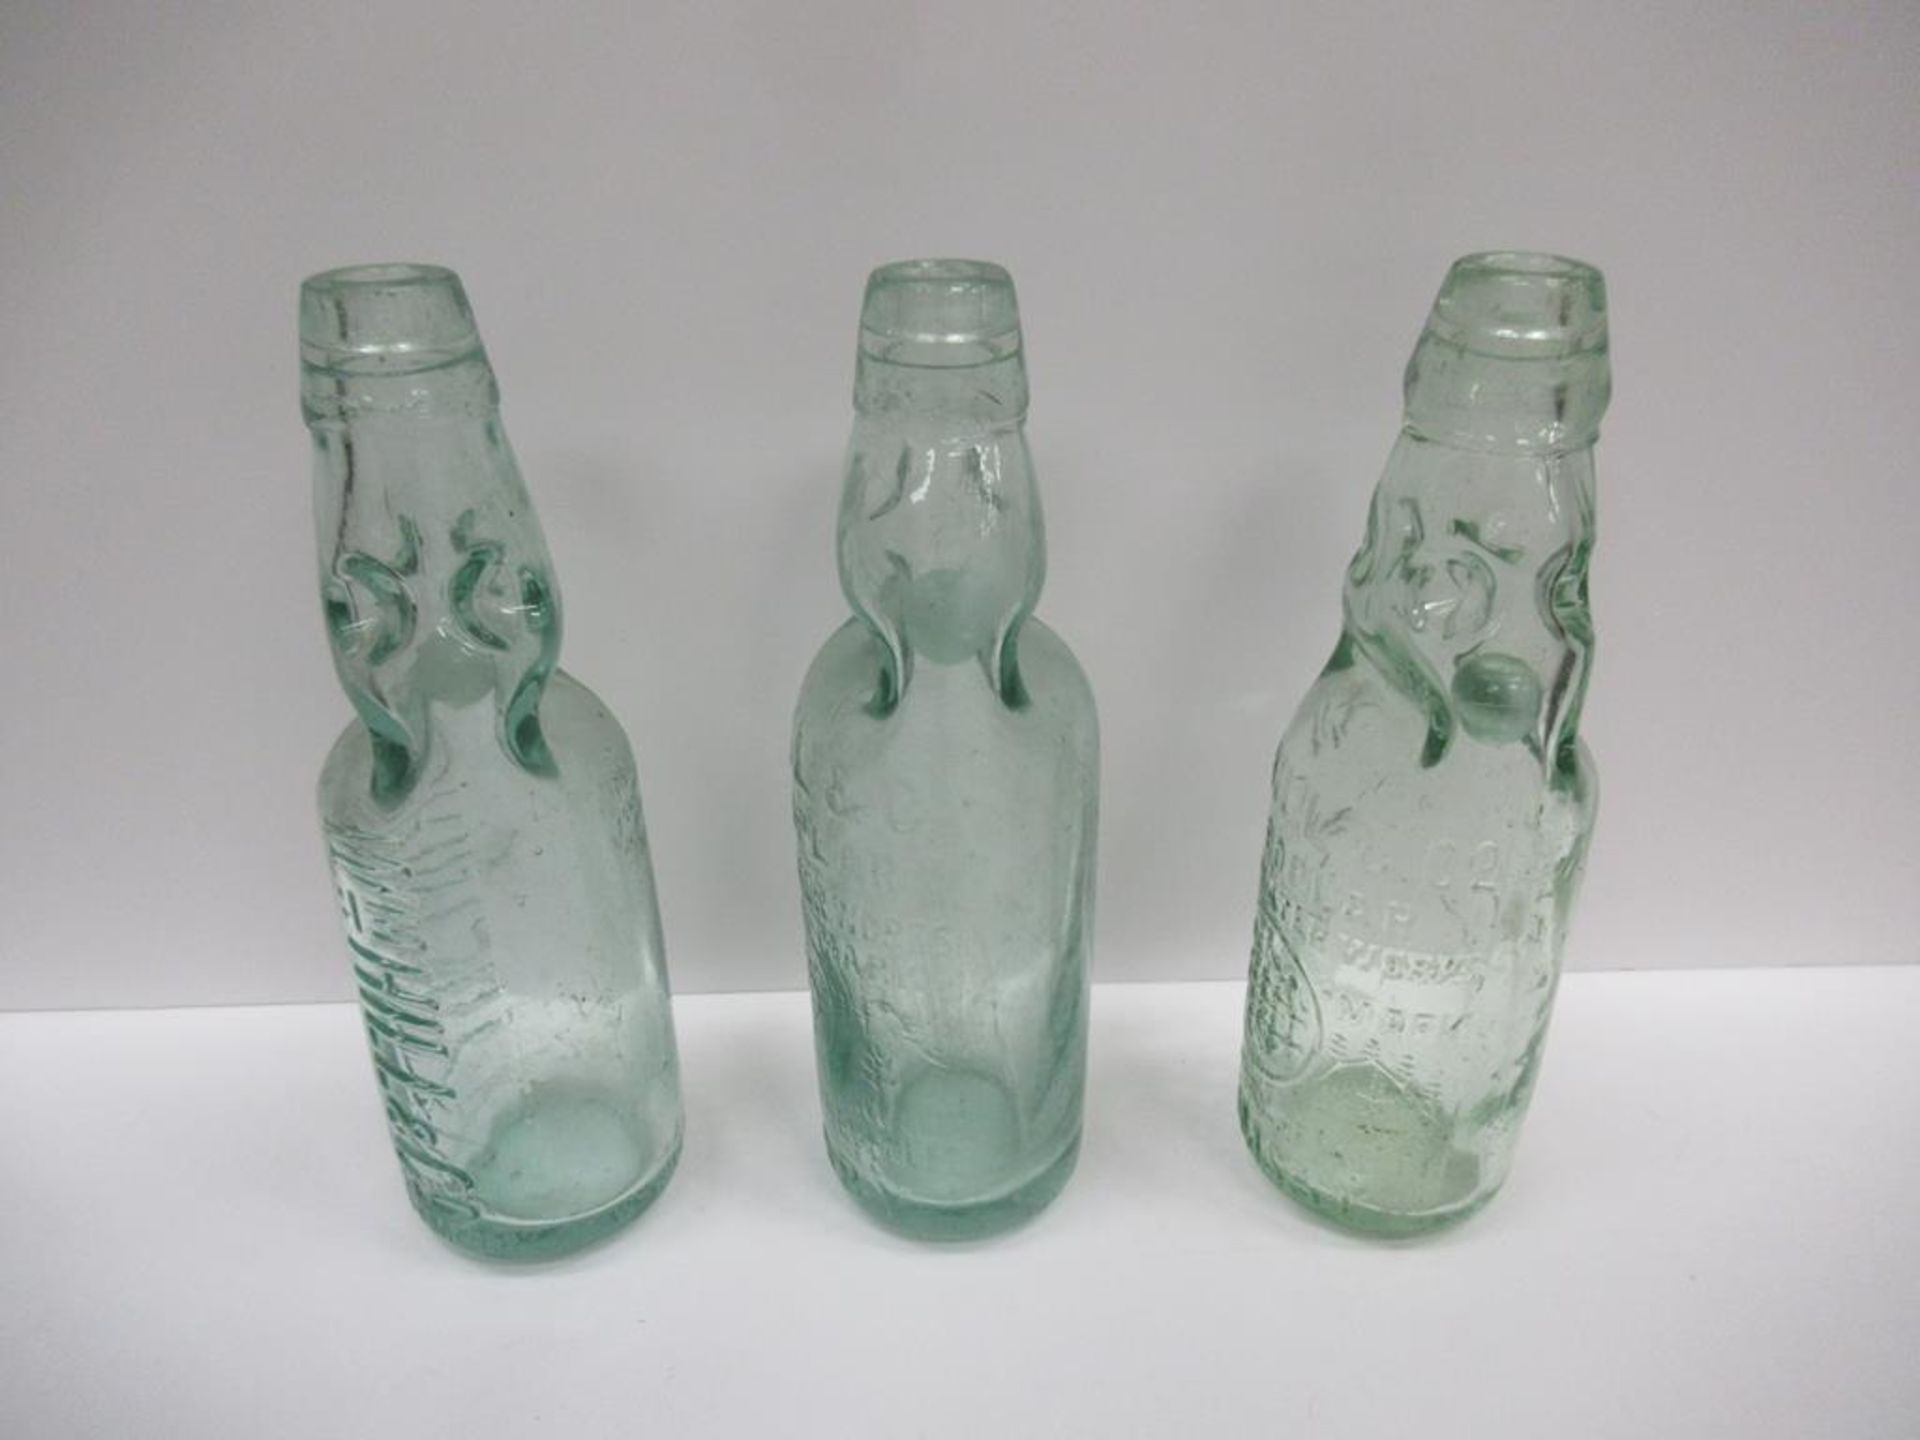 6x Grimsby W.M Hill & Co (4) and W. Hill & Son (2) Codd bottles - Image 15 of 21